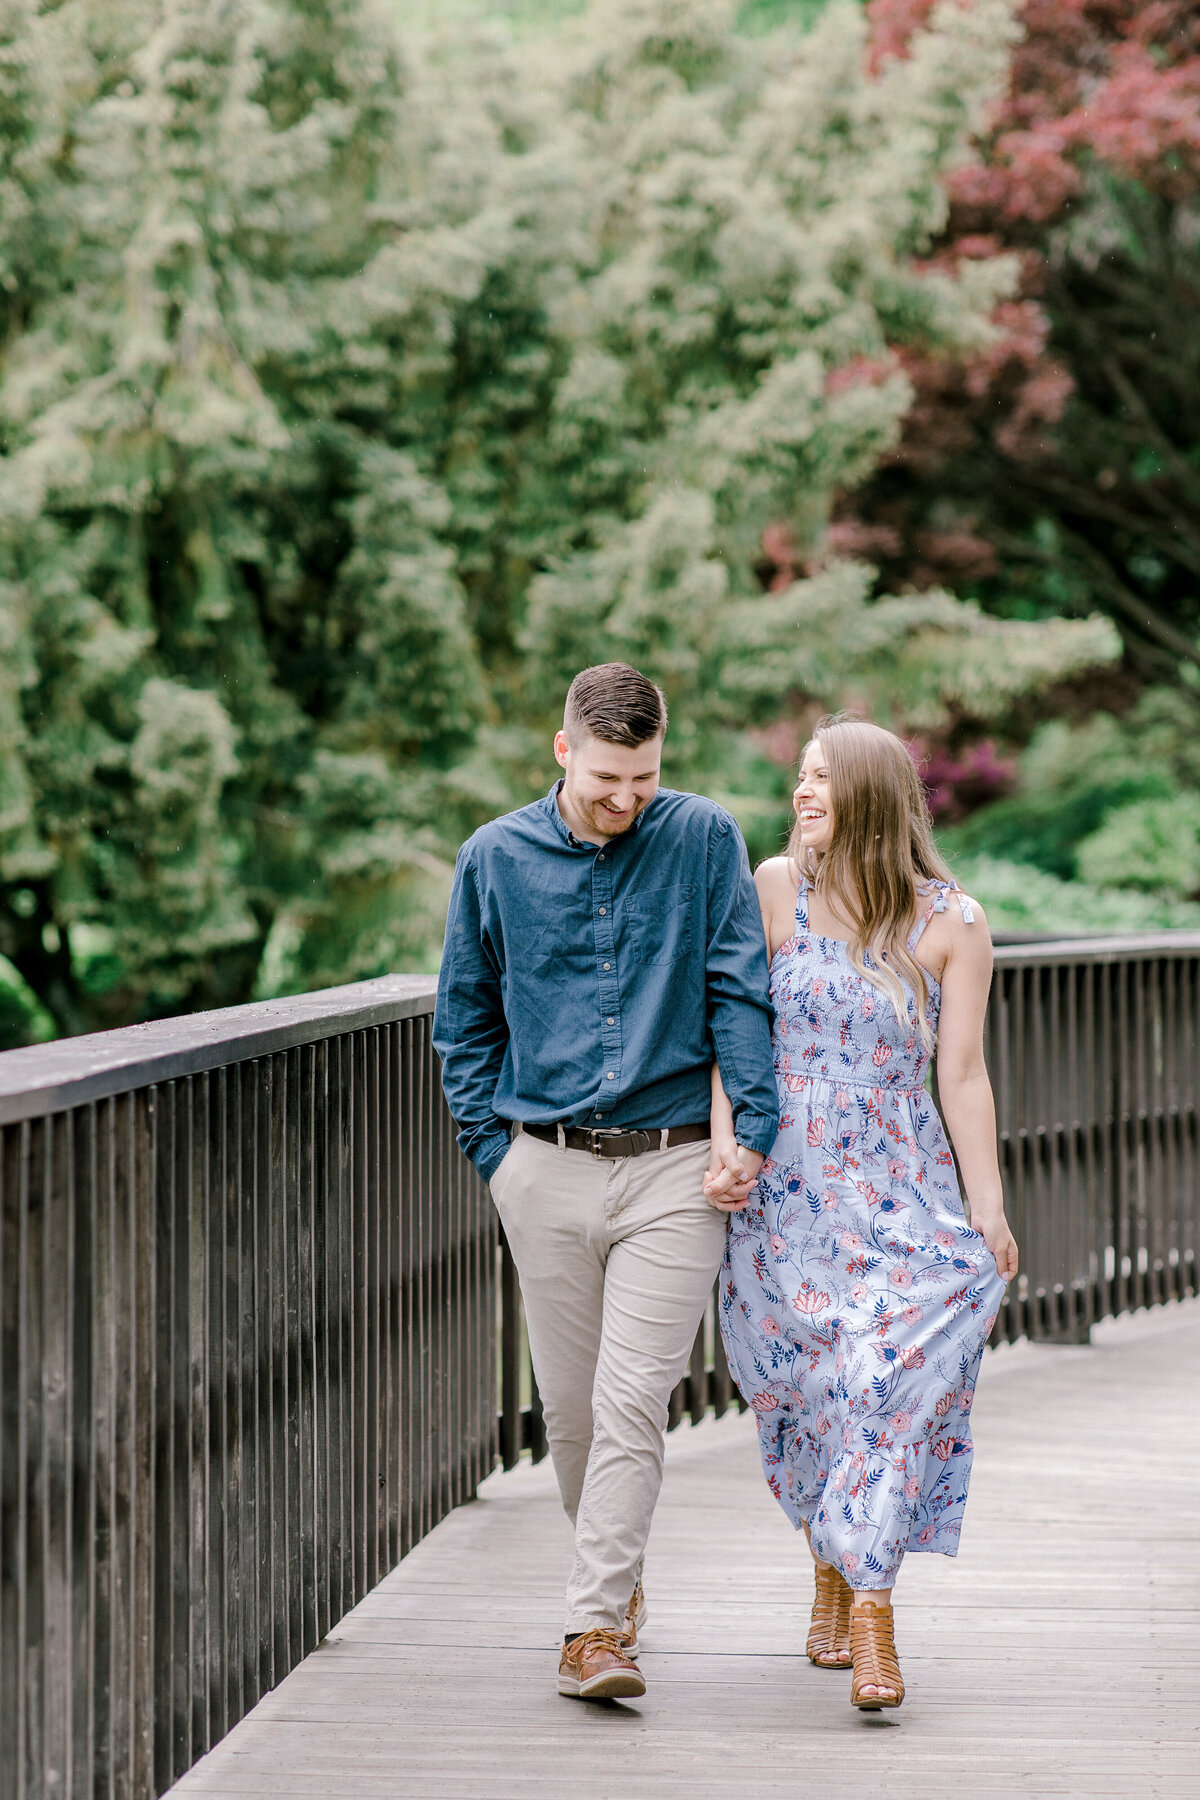 Hershey Garden Engagement Session Photography Photo-16